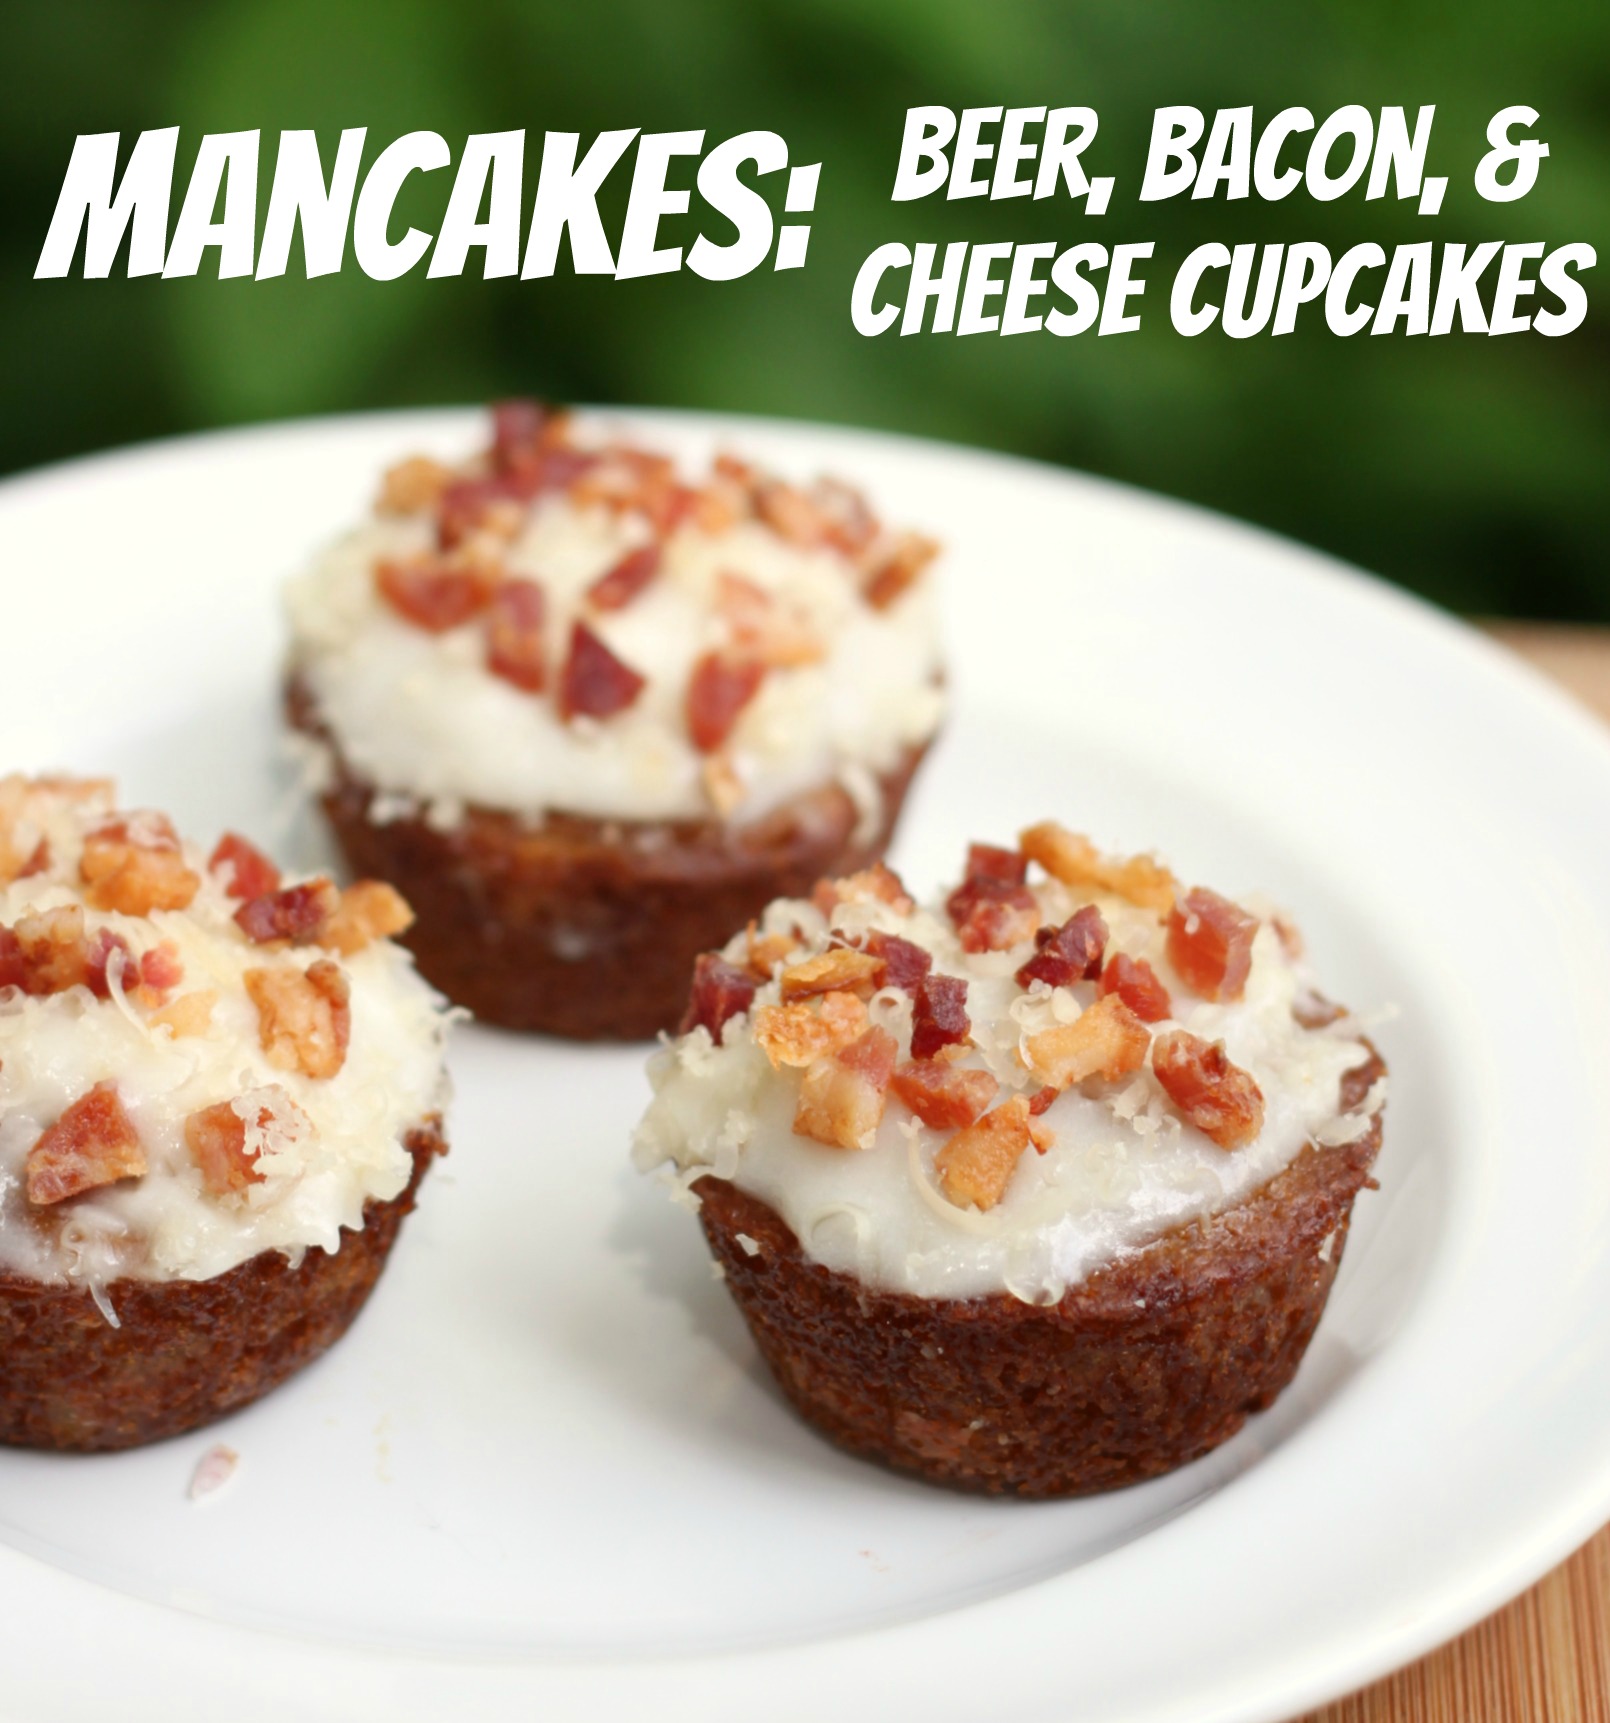 Mancakes Beer, Bacon, and Cheese Cupcakes